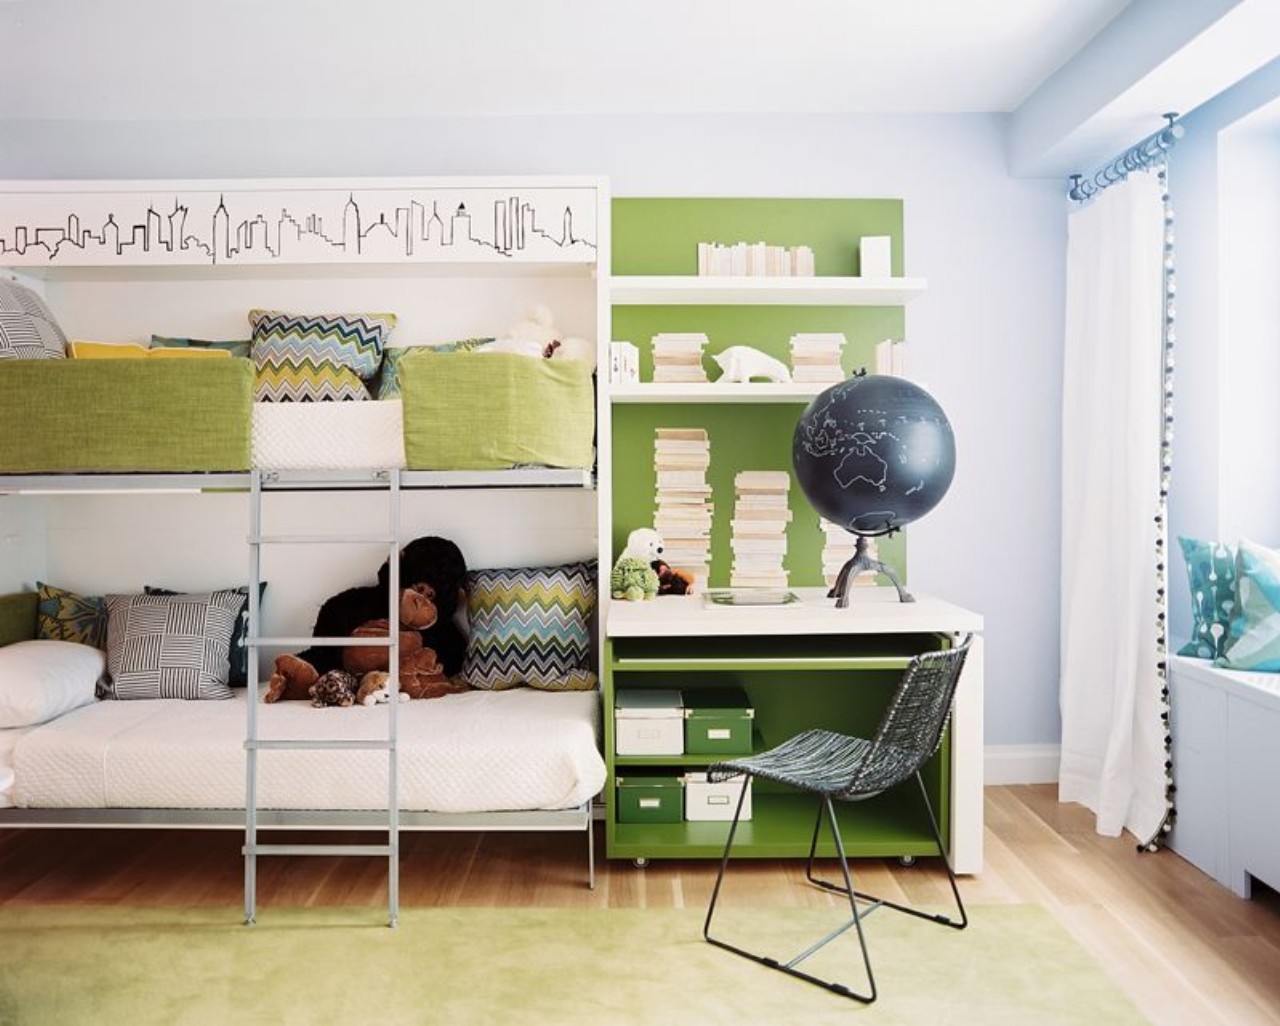 Kids Room Boys Elegance Kids Room Furniture For Boys Design Ideas With Unconventionally Modern Bunk Bed Design And Striped Wooden Flooring Idea Also Interesting White Study Desk Design Plus Book Shelves Idea Furniture Composing The Special Type Of Kids Room Furniture